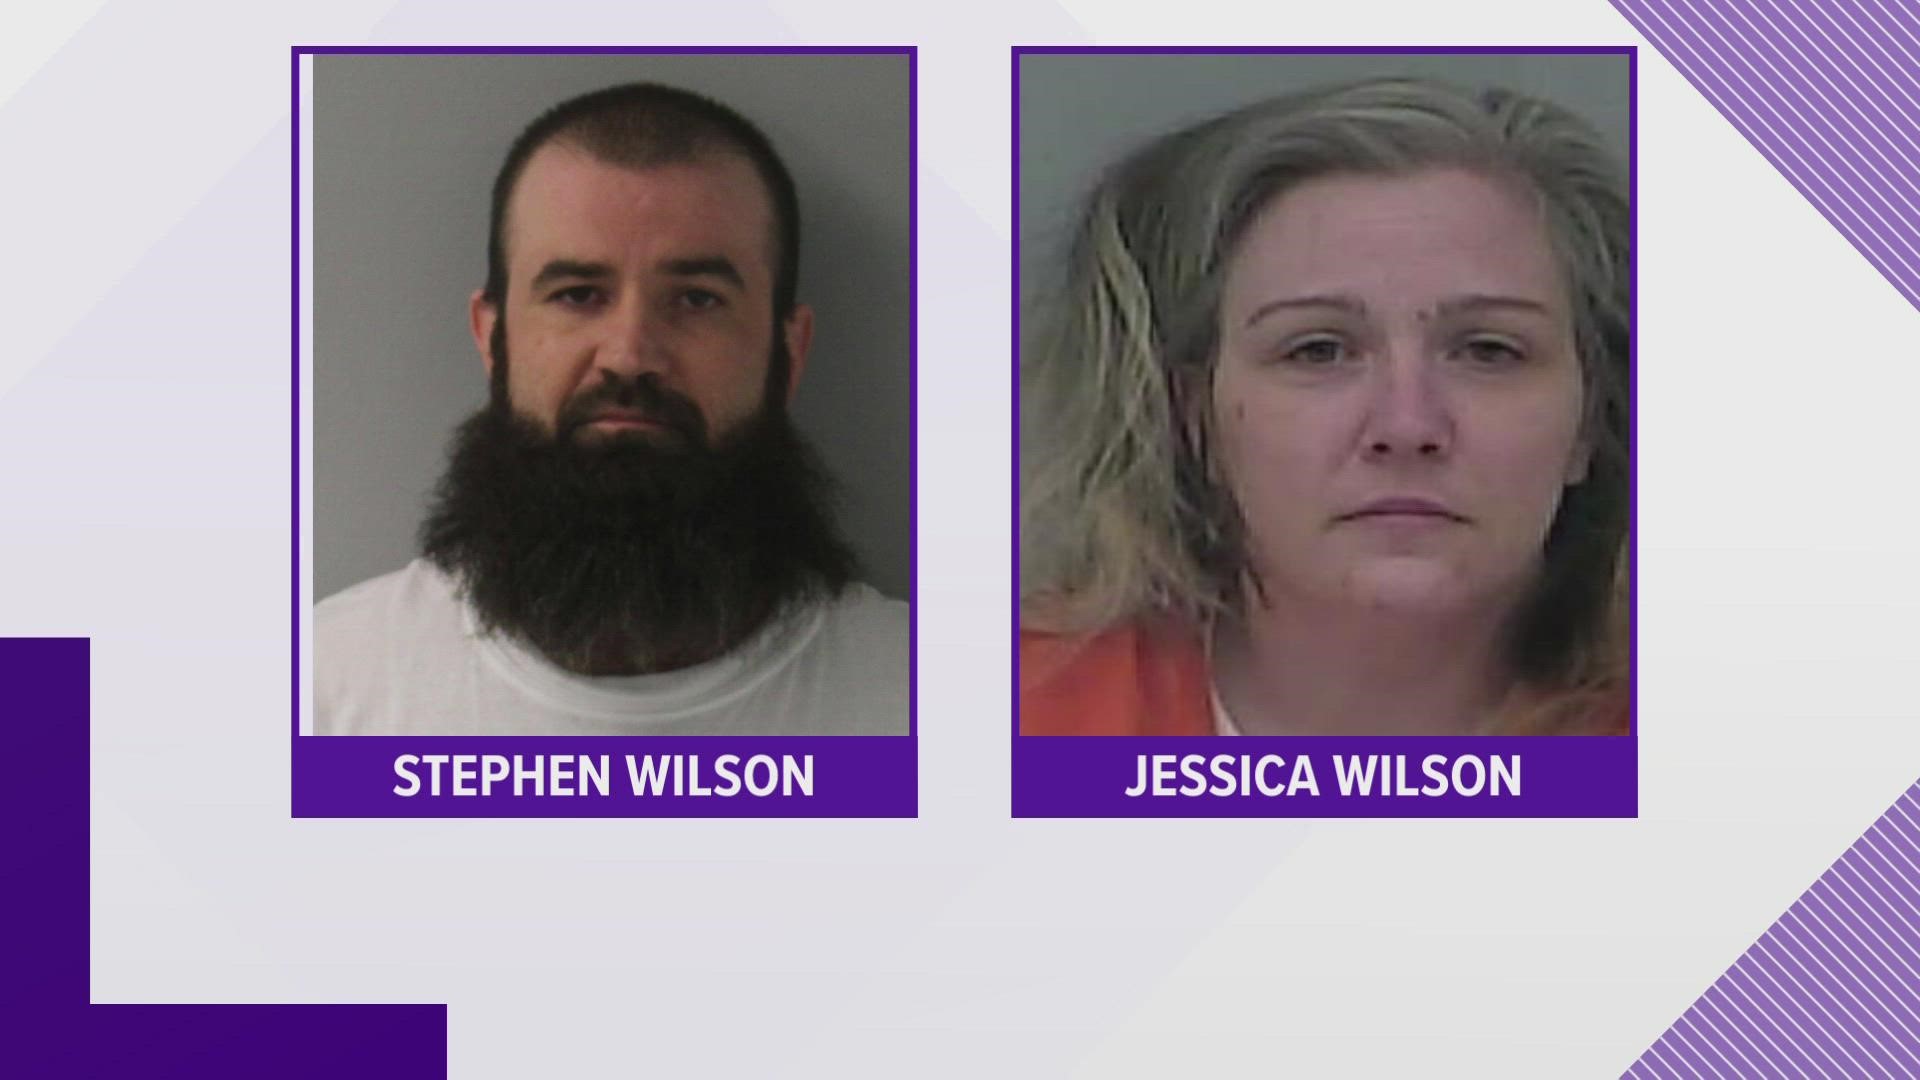 A husband and wife in central Ohio were sentenced to prison for crimes involving minors after being arrested January 2021.